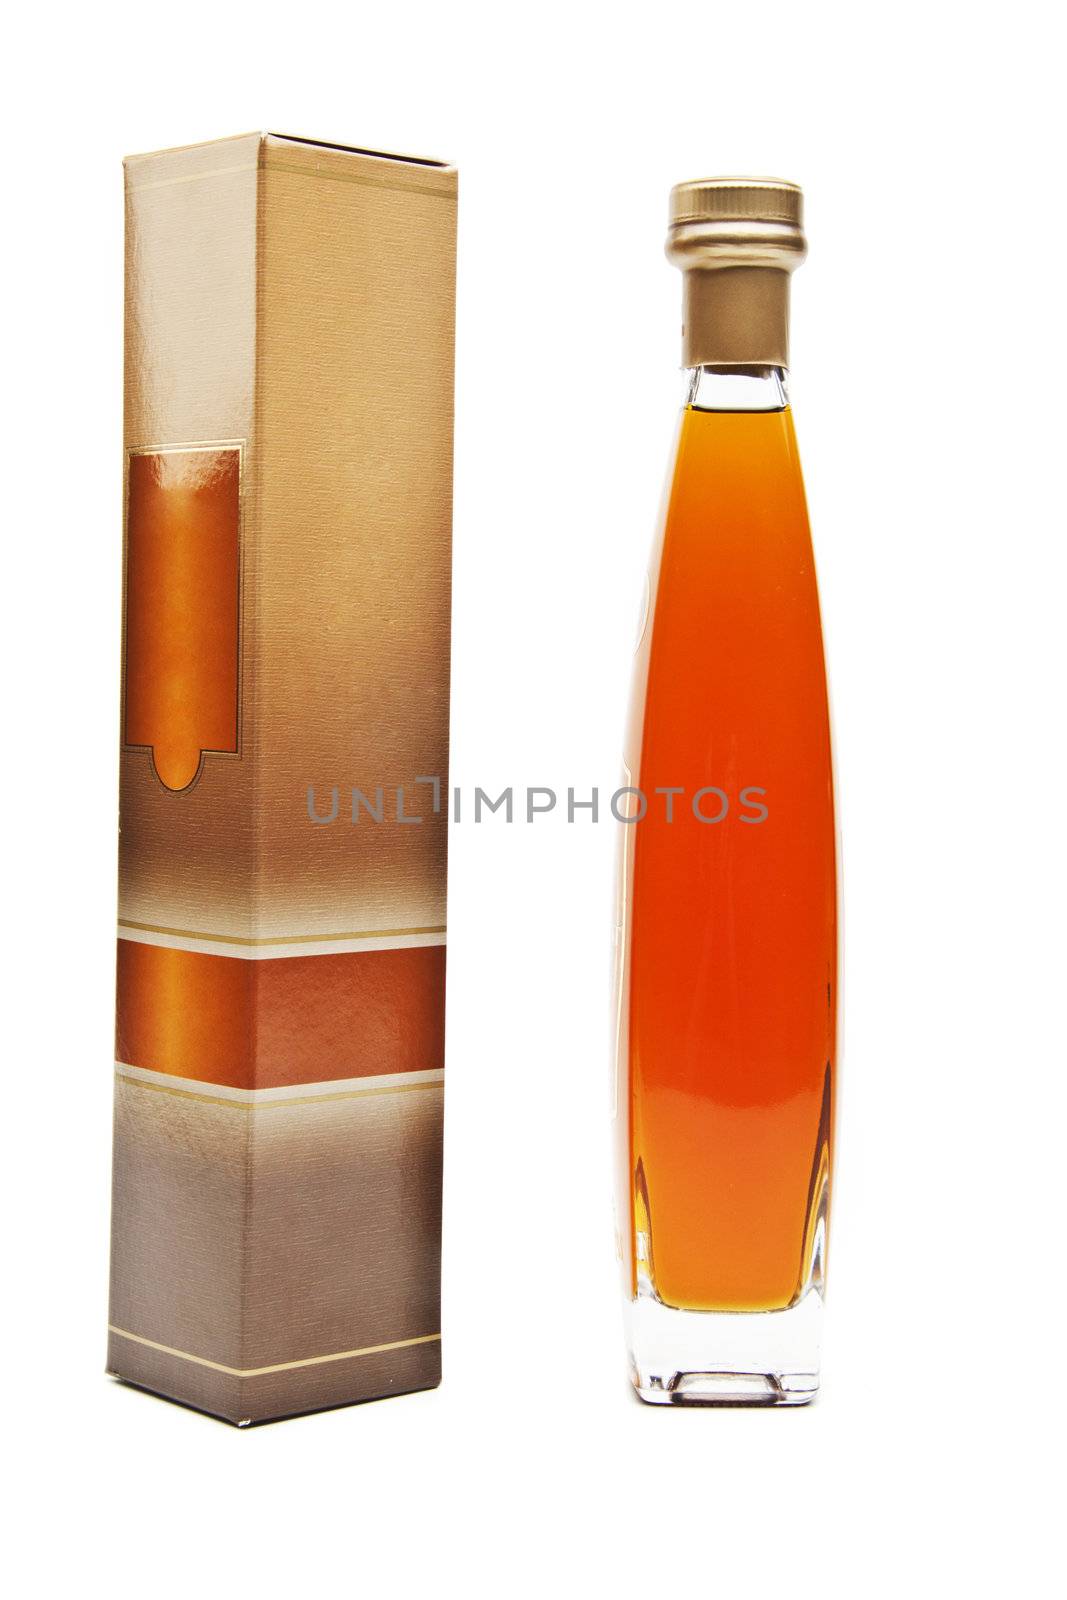 Cognac in bottle without labels